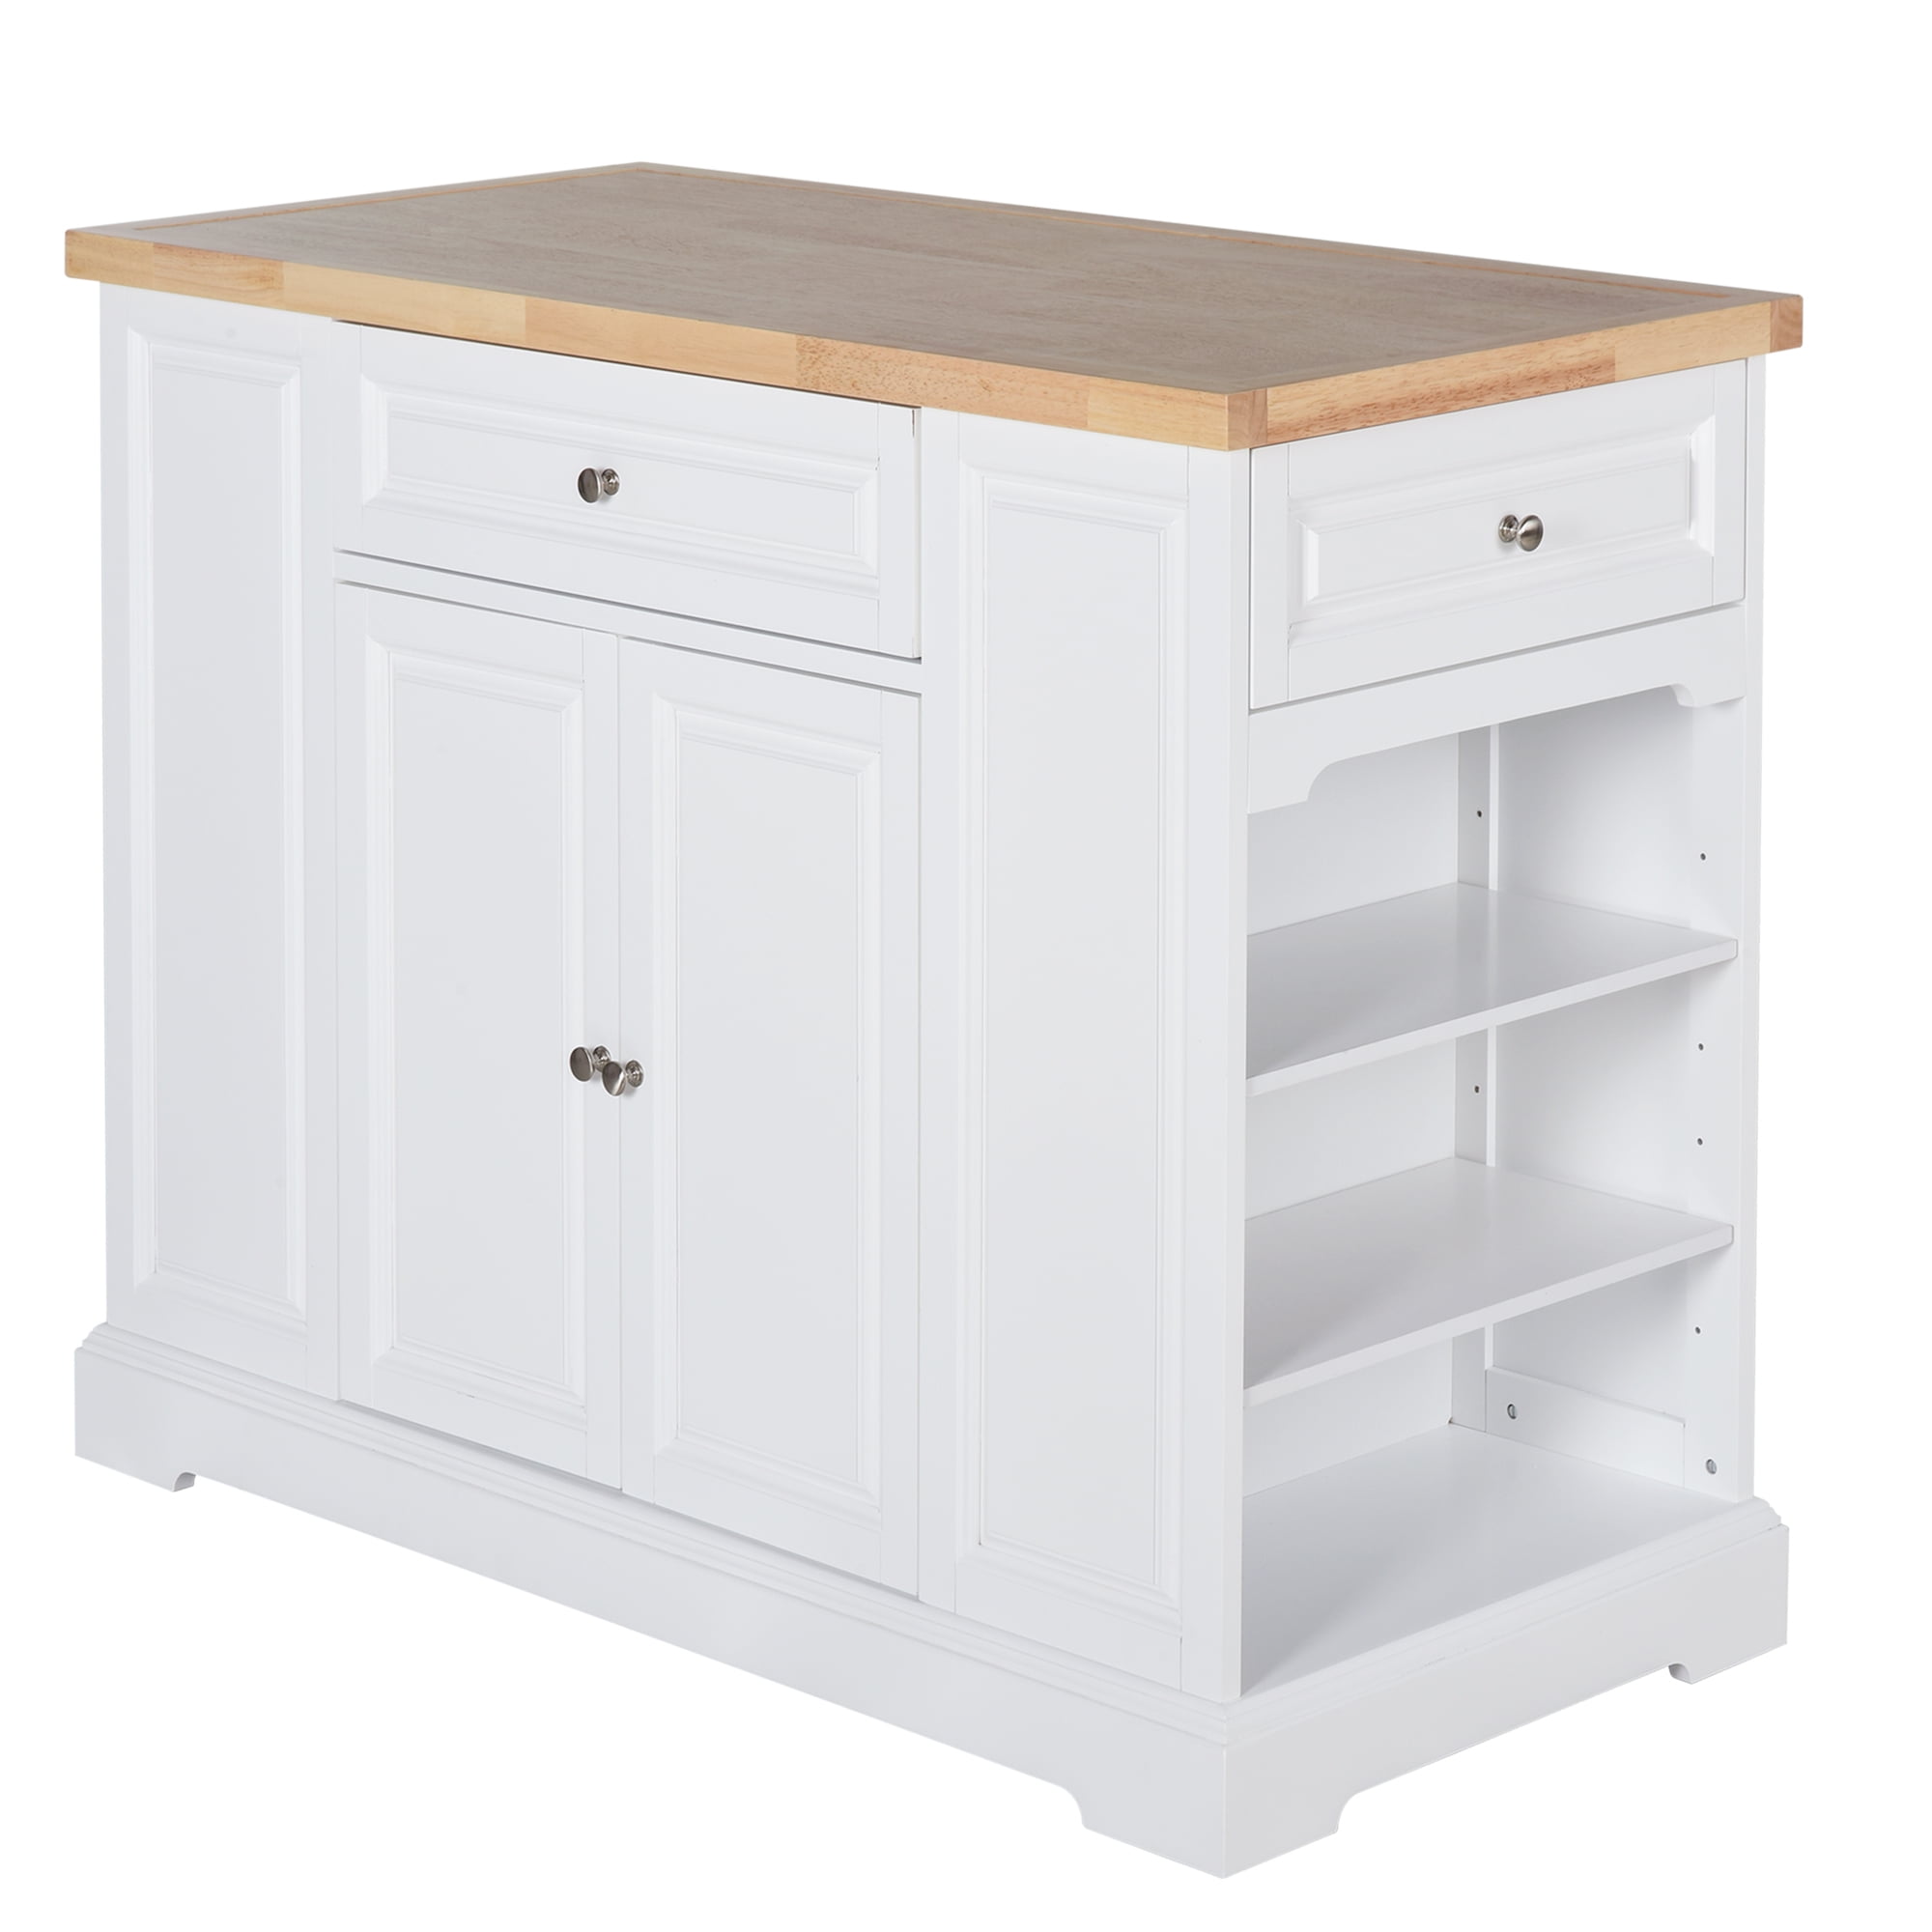 Creatice Kitchen Islands And Carts Furniture for Small Space